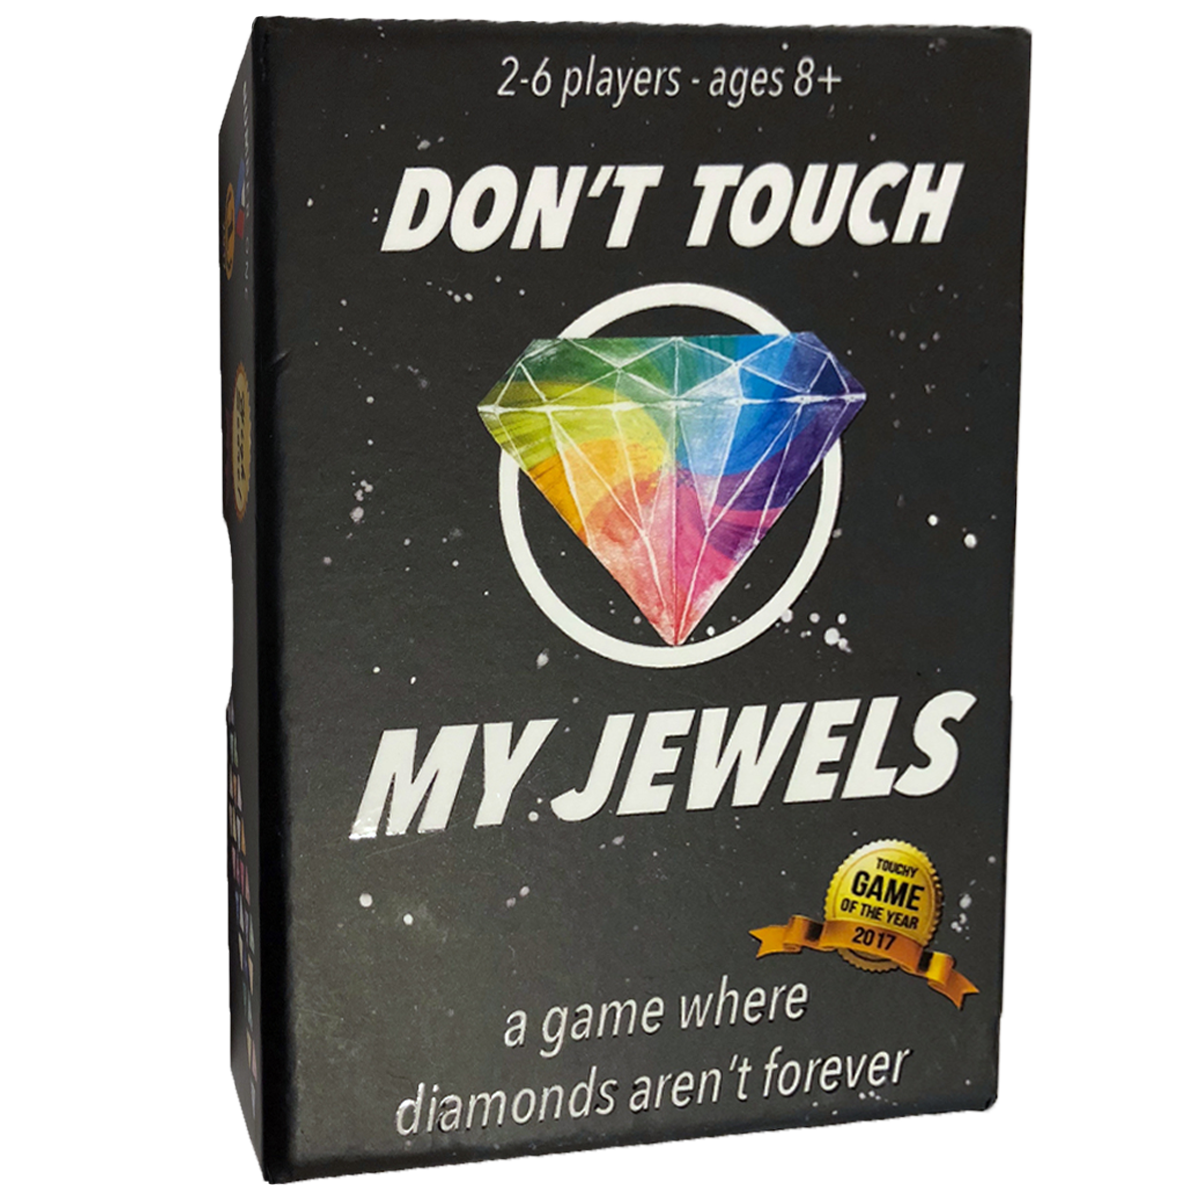 Don't Touch My Jewels